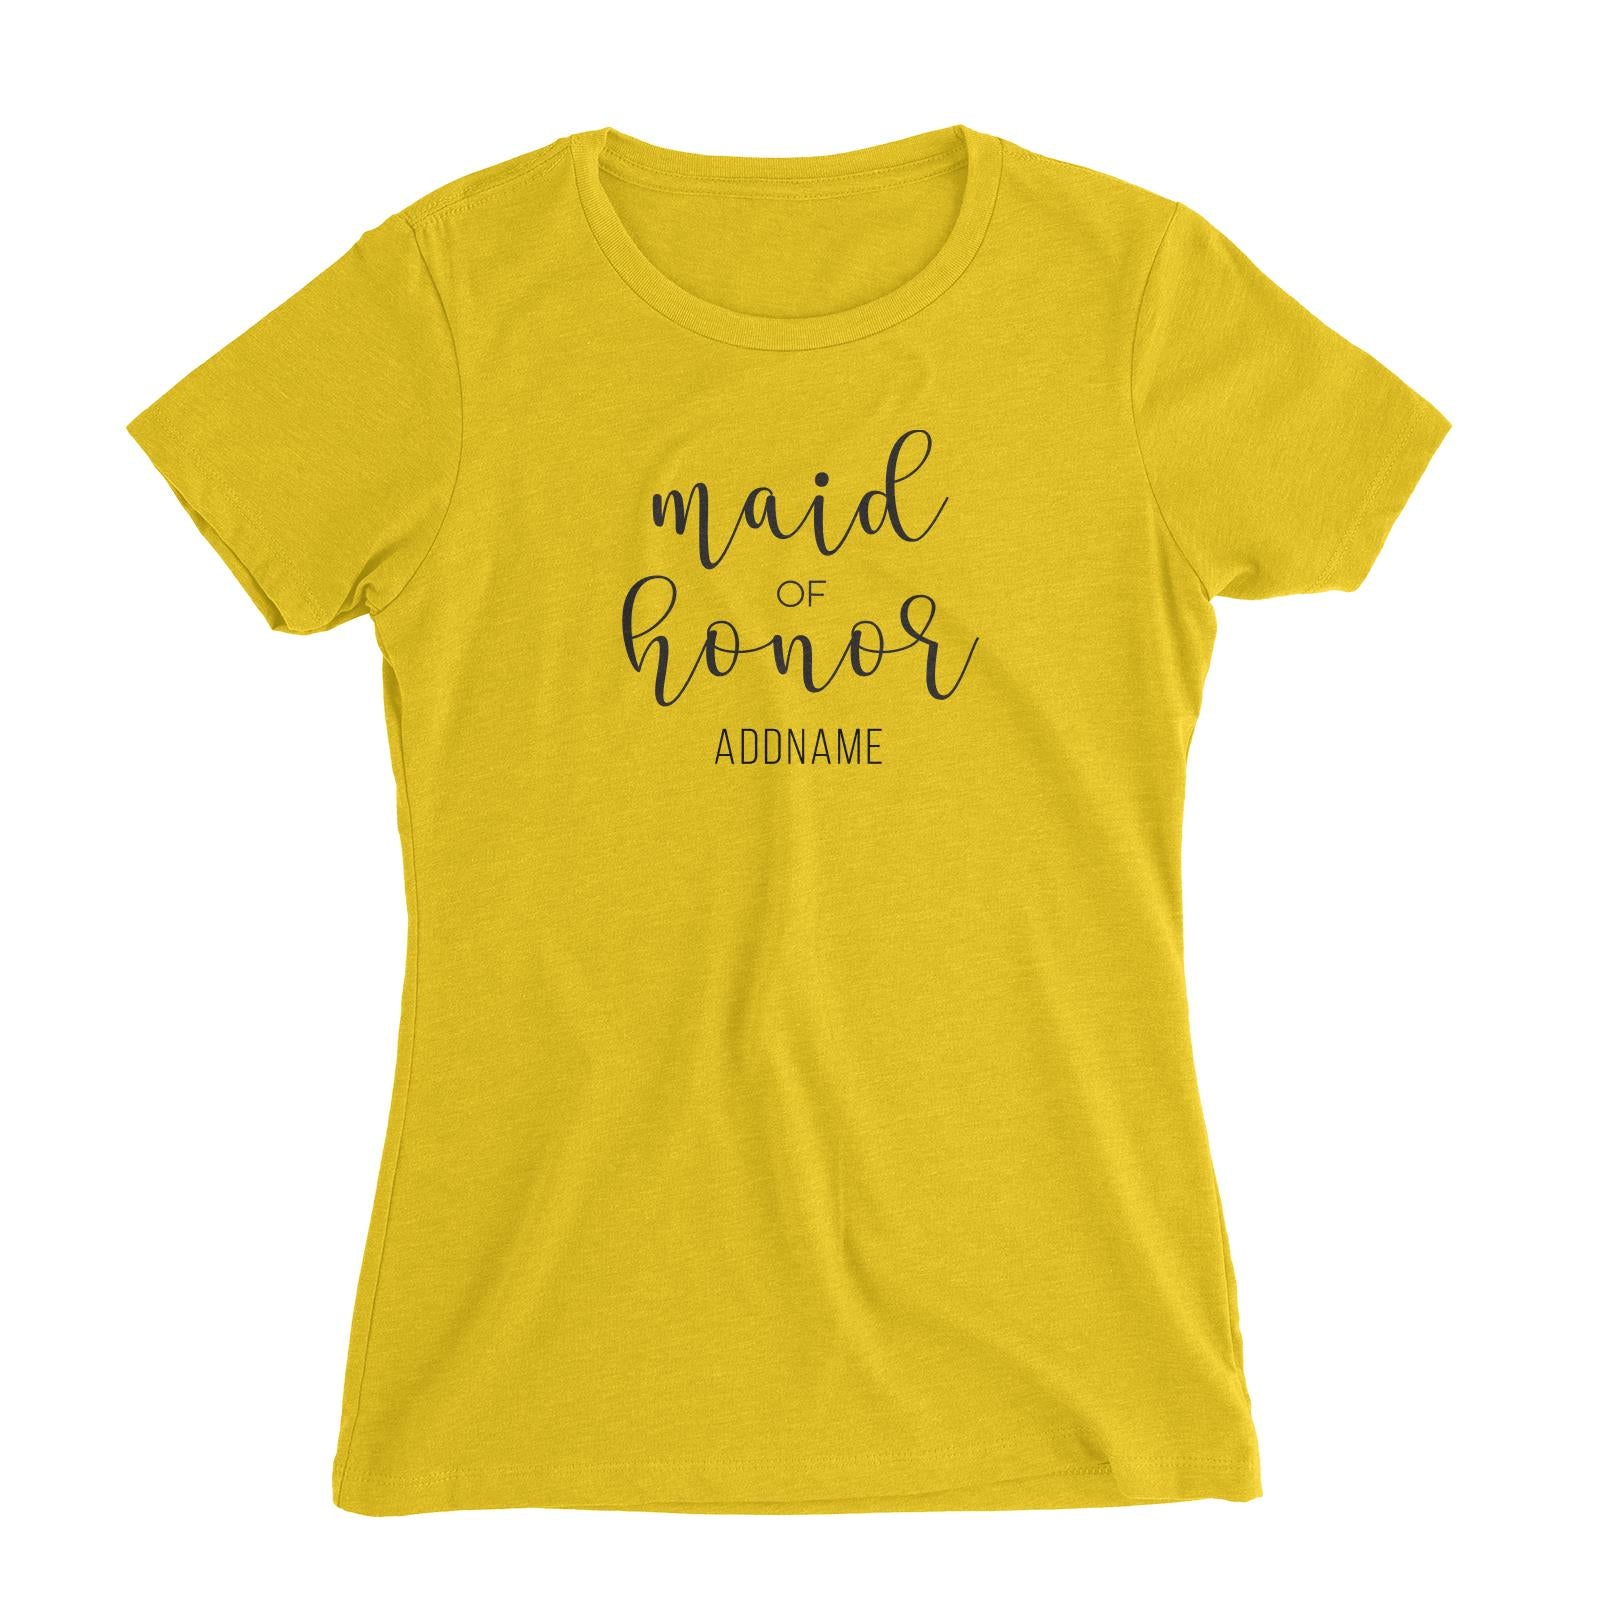 Bridesmaid Calligraphy Maid Of Honour Subtle Addname Women Slim Fit T-Shirt